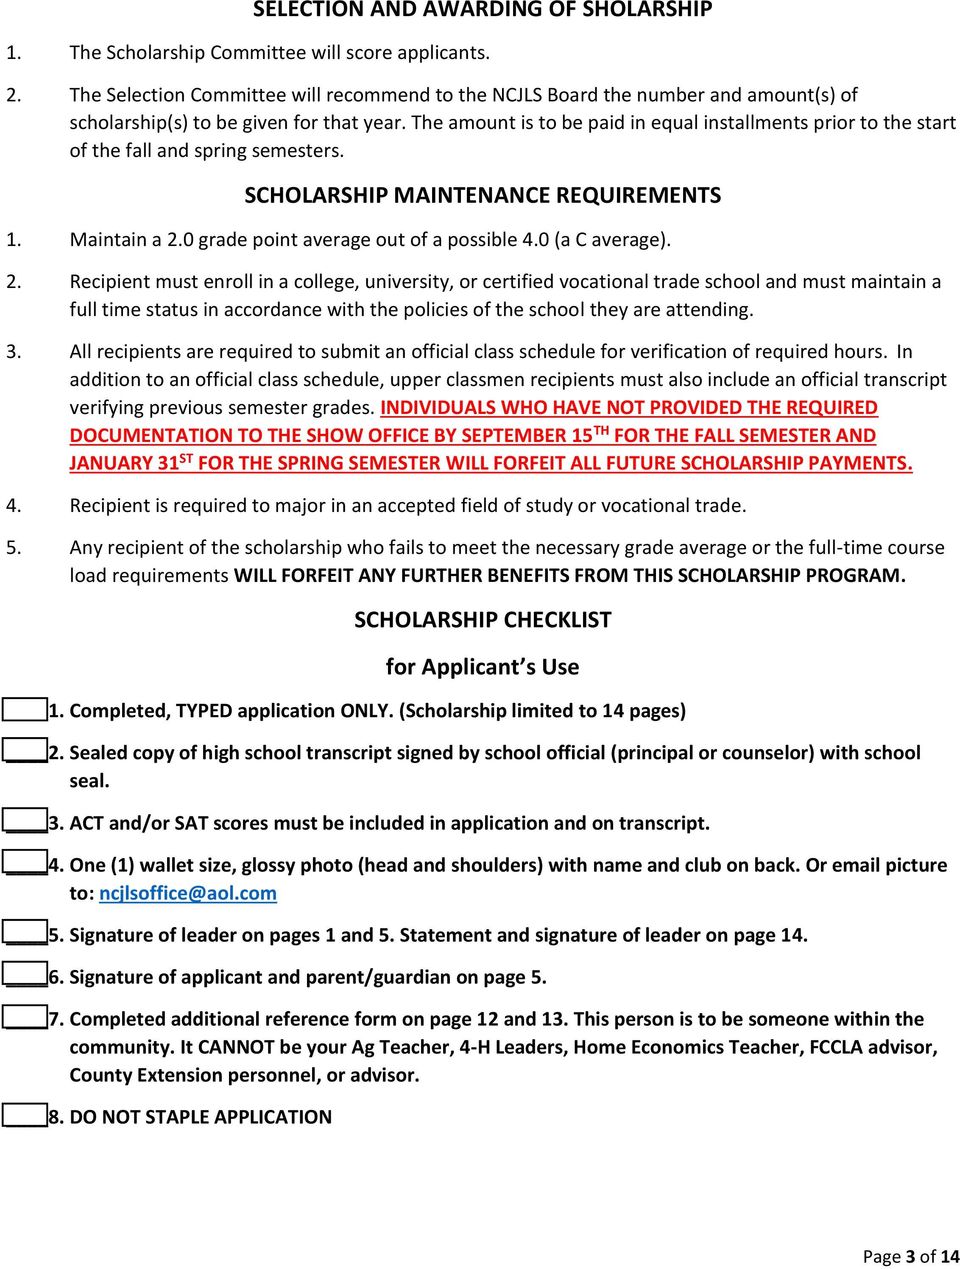 The amount is to be paid in equal installments prior to the start of the fall and spring semesters. SCHOLARSHIP MAINTENANCE REQUIREMENTS 1. Maintain a 2.0 grade point average out of a possible 4.